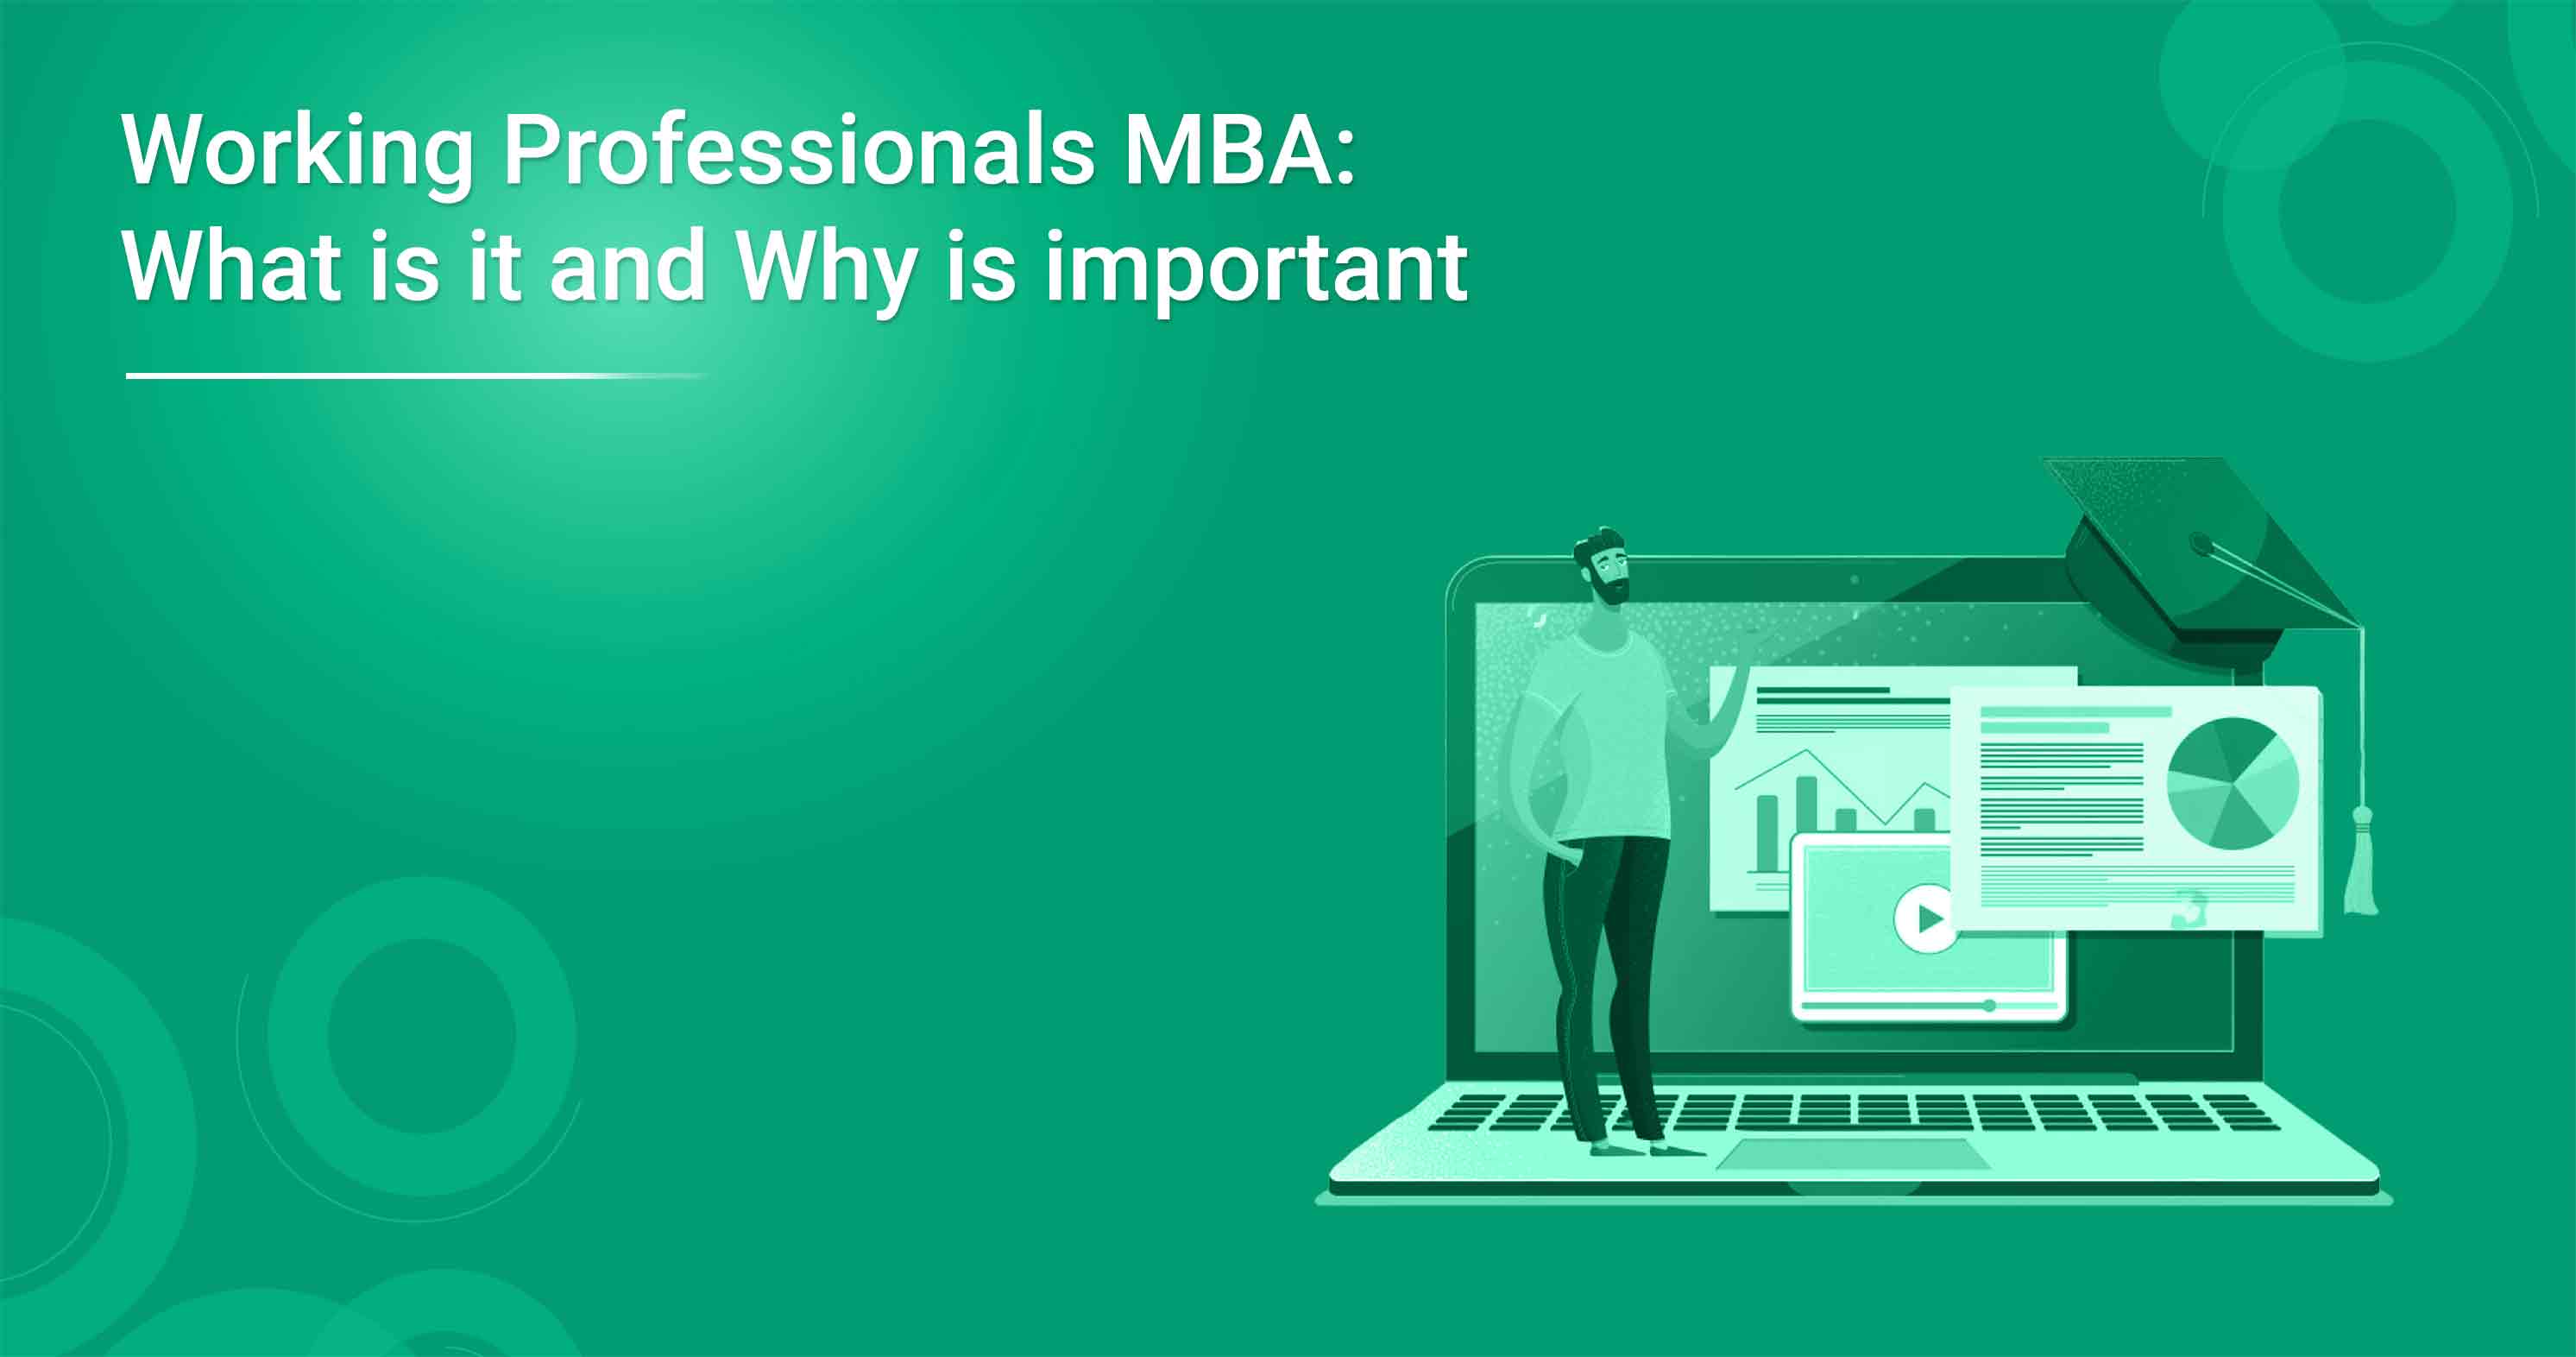 Working Professionals MBA: What is it and Why is it Important